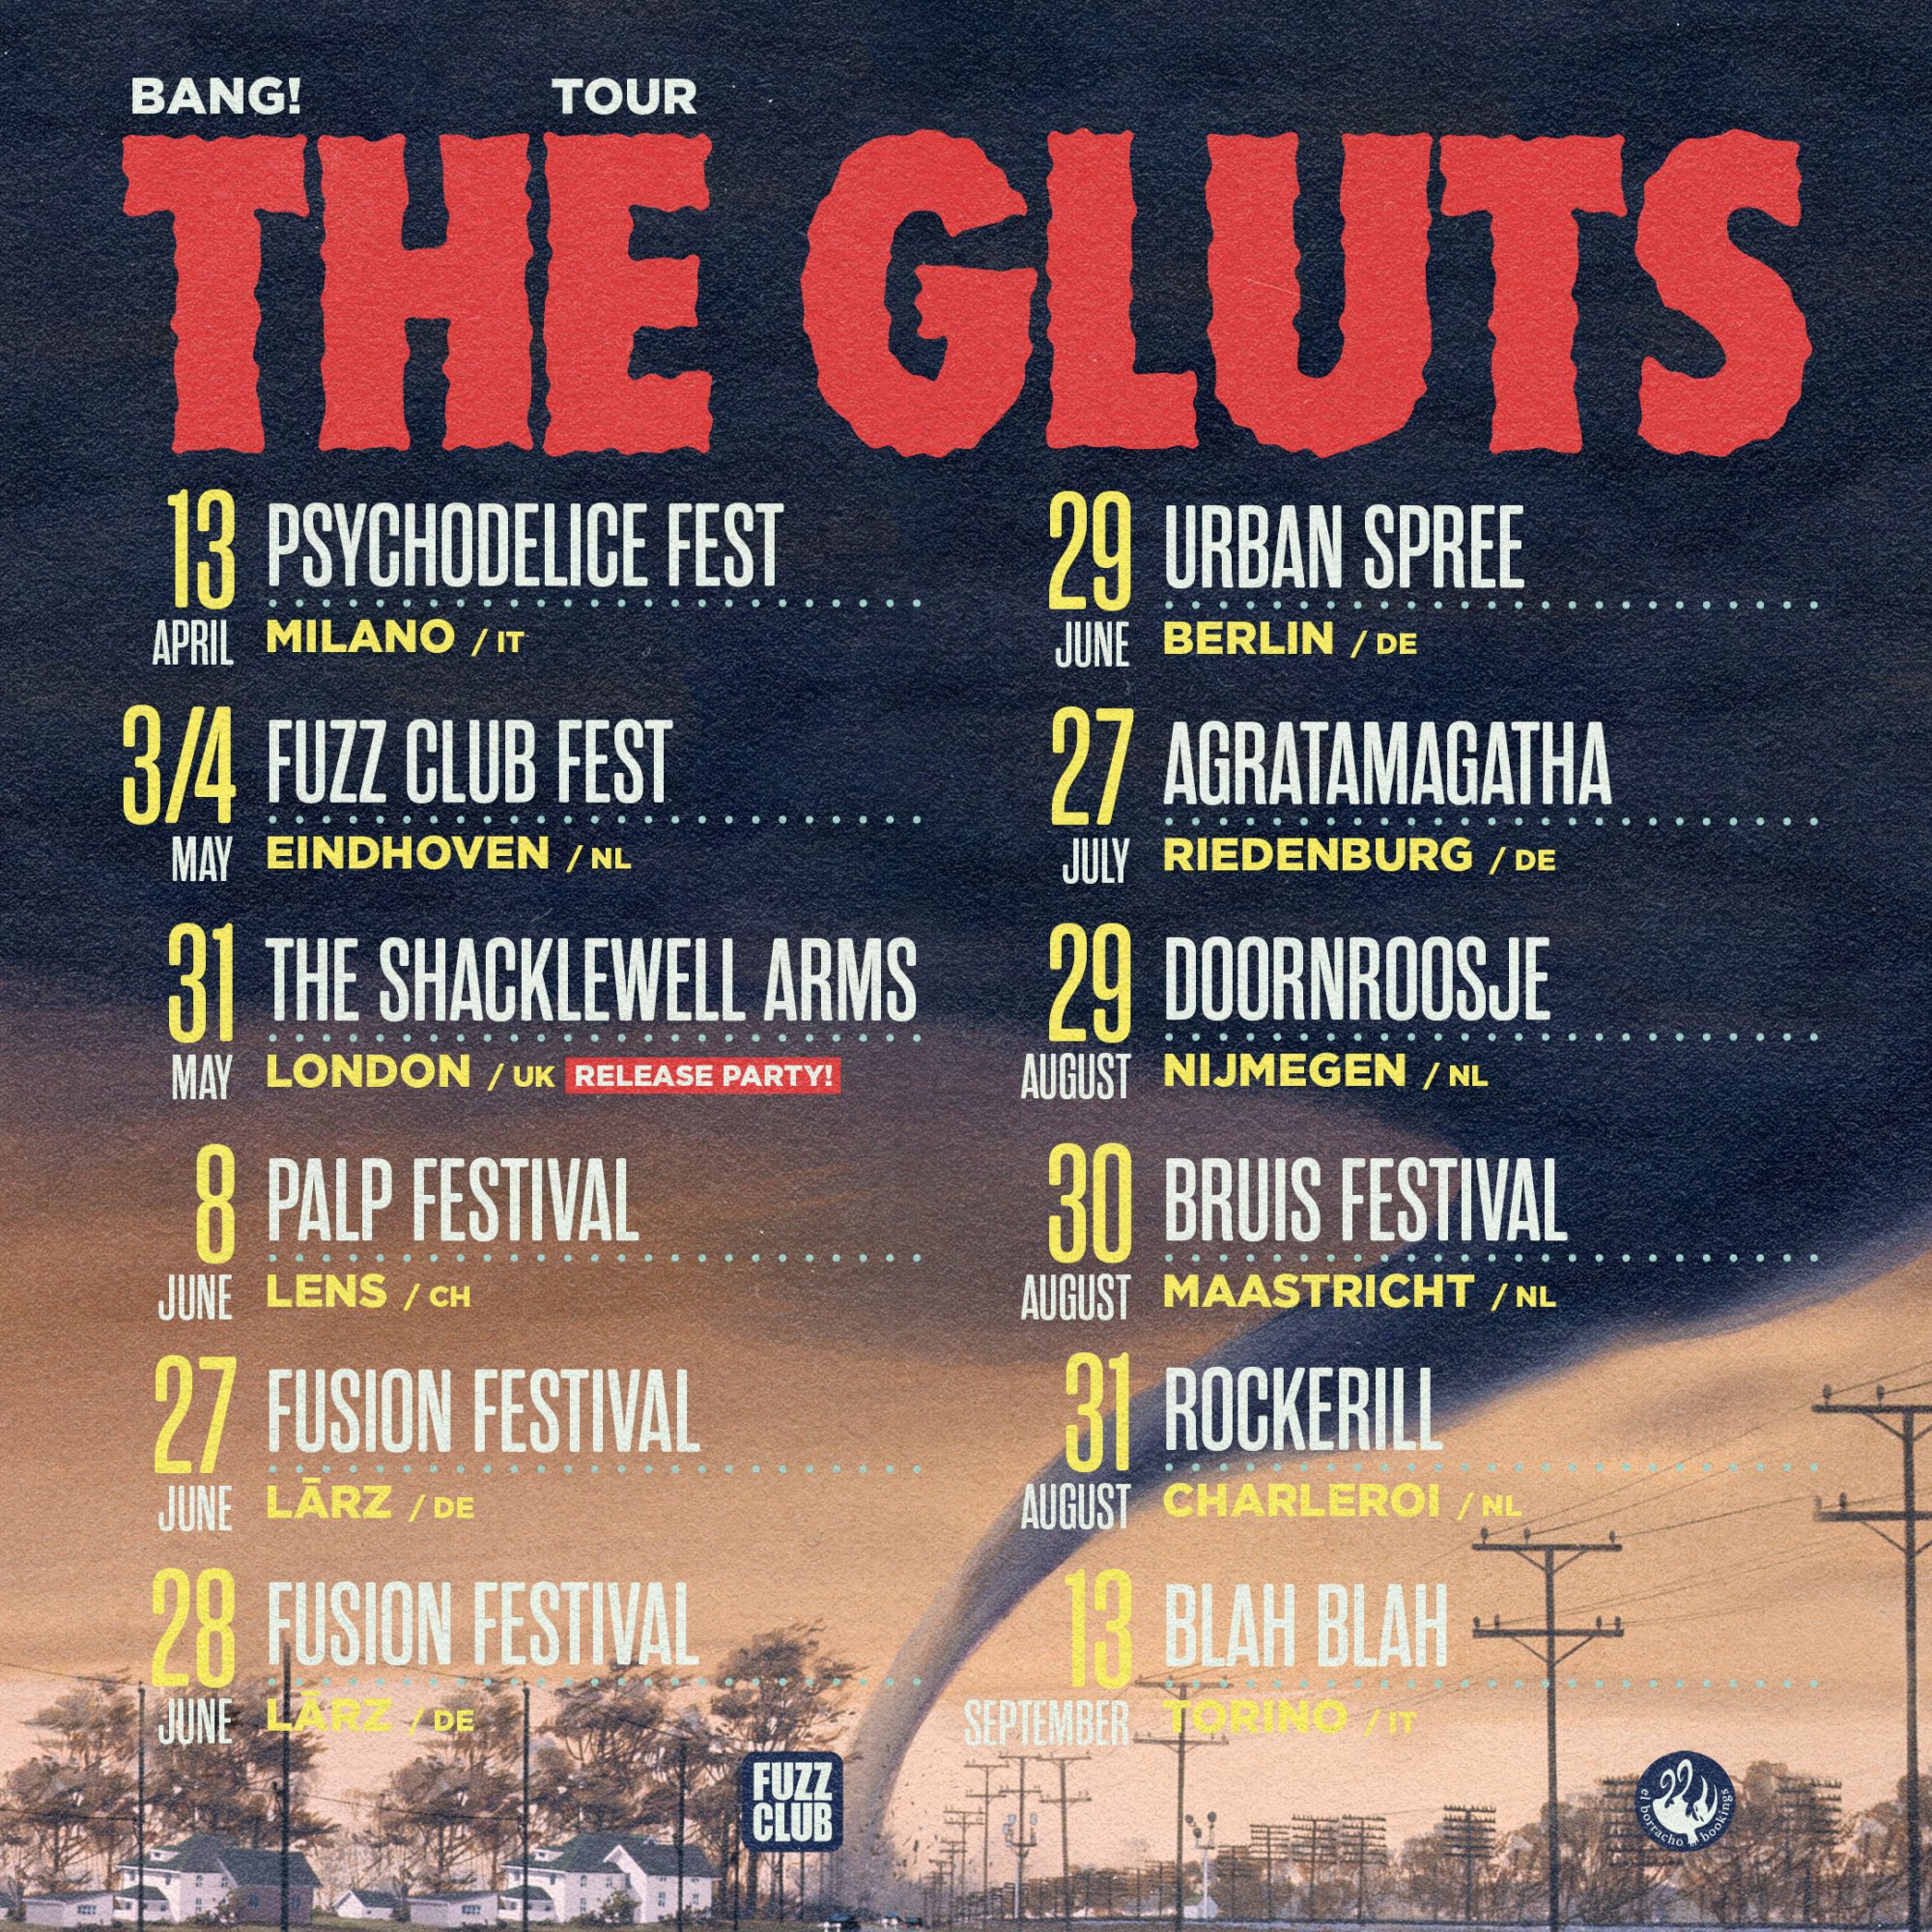 HOLIDAY IN THE SOUND! THE GLUTS + AT NIGHT